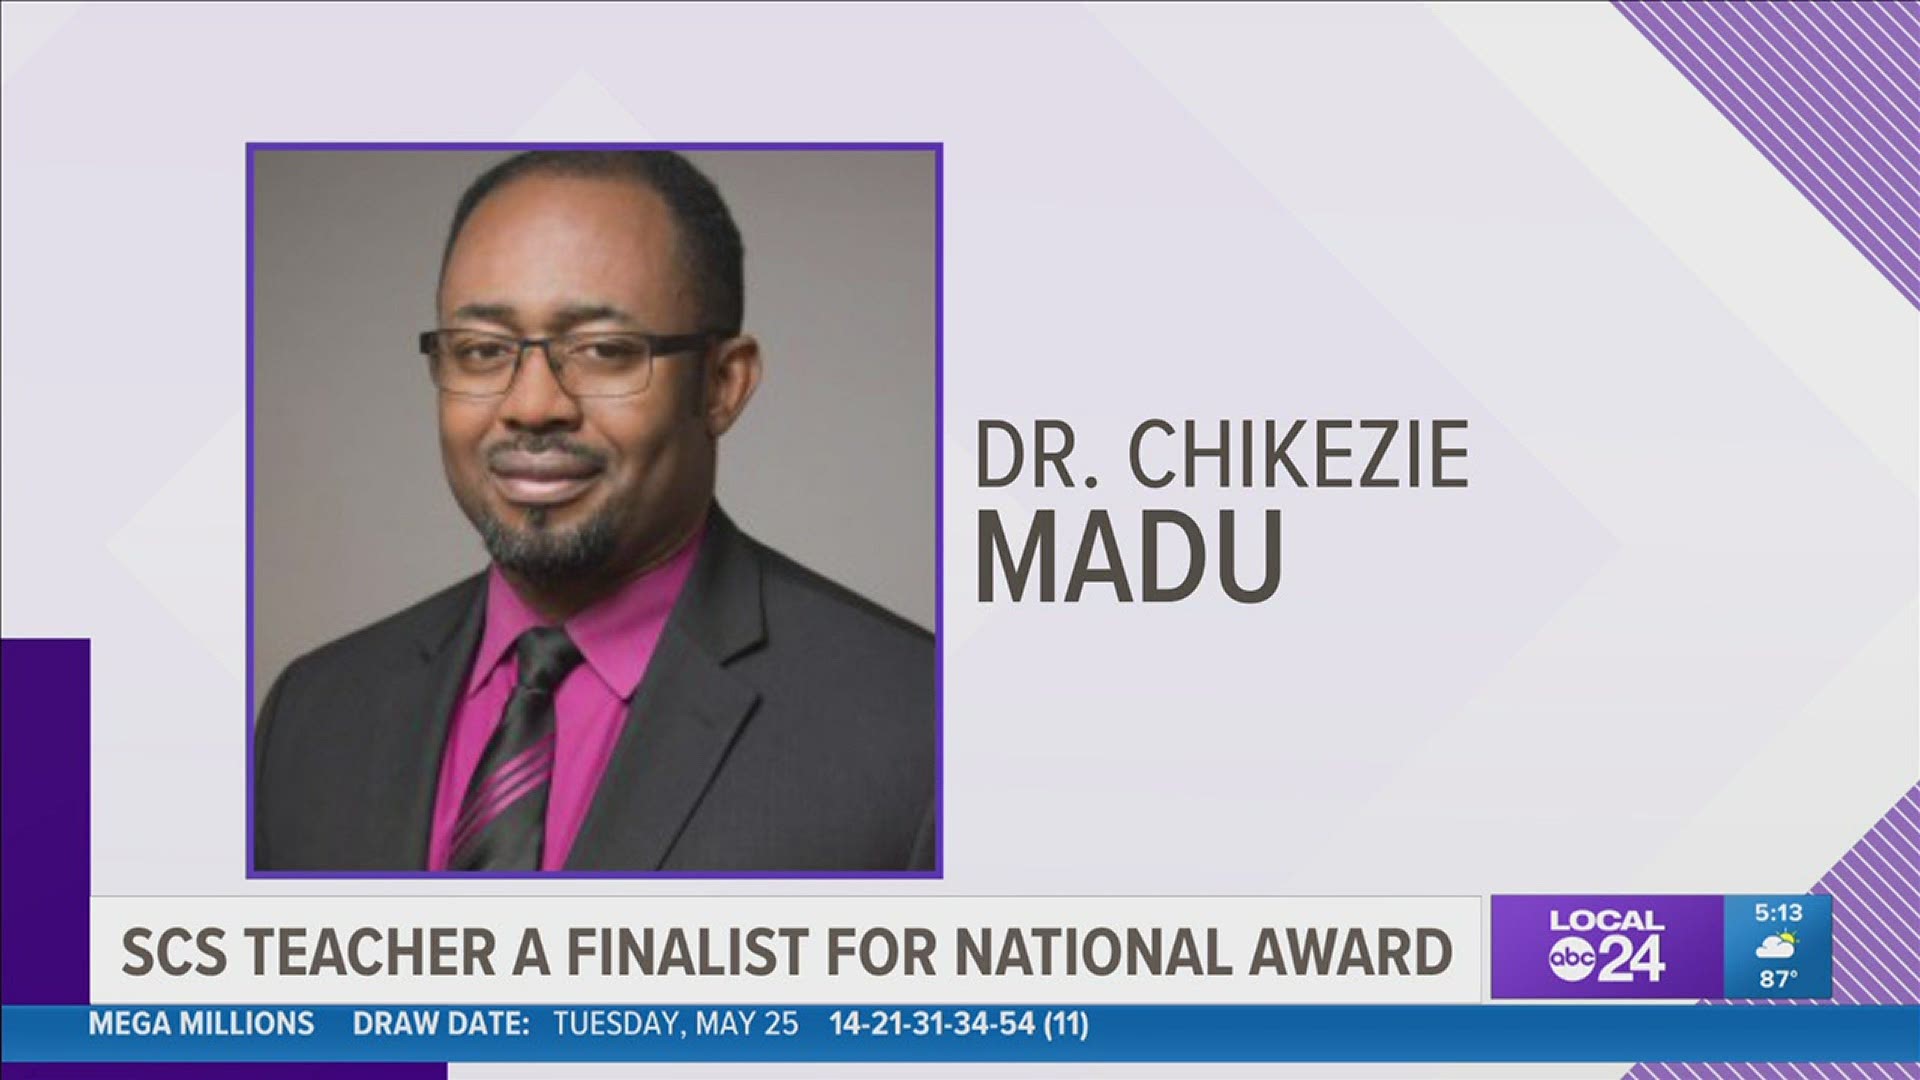 Congratulations go out to Chikezie Madu, a science teacher at White Station High School, part of Shelby County Schools.